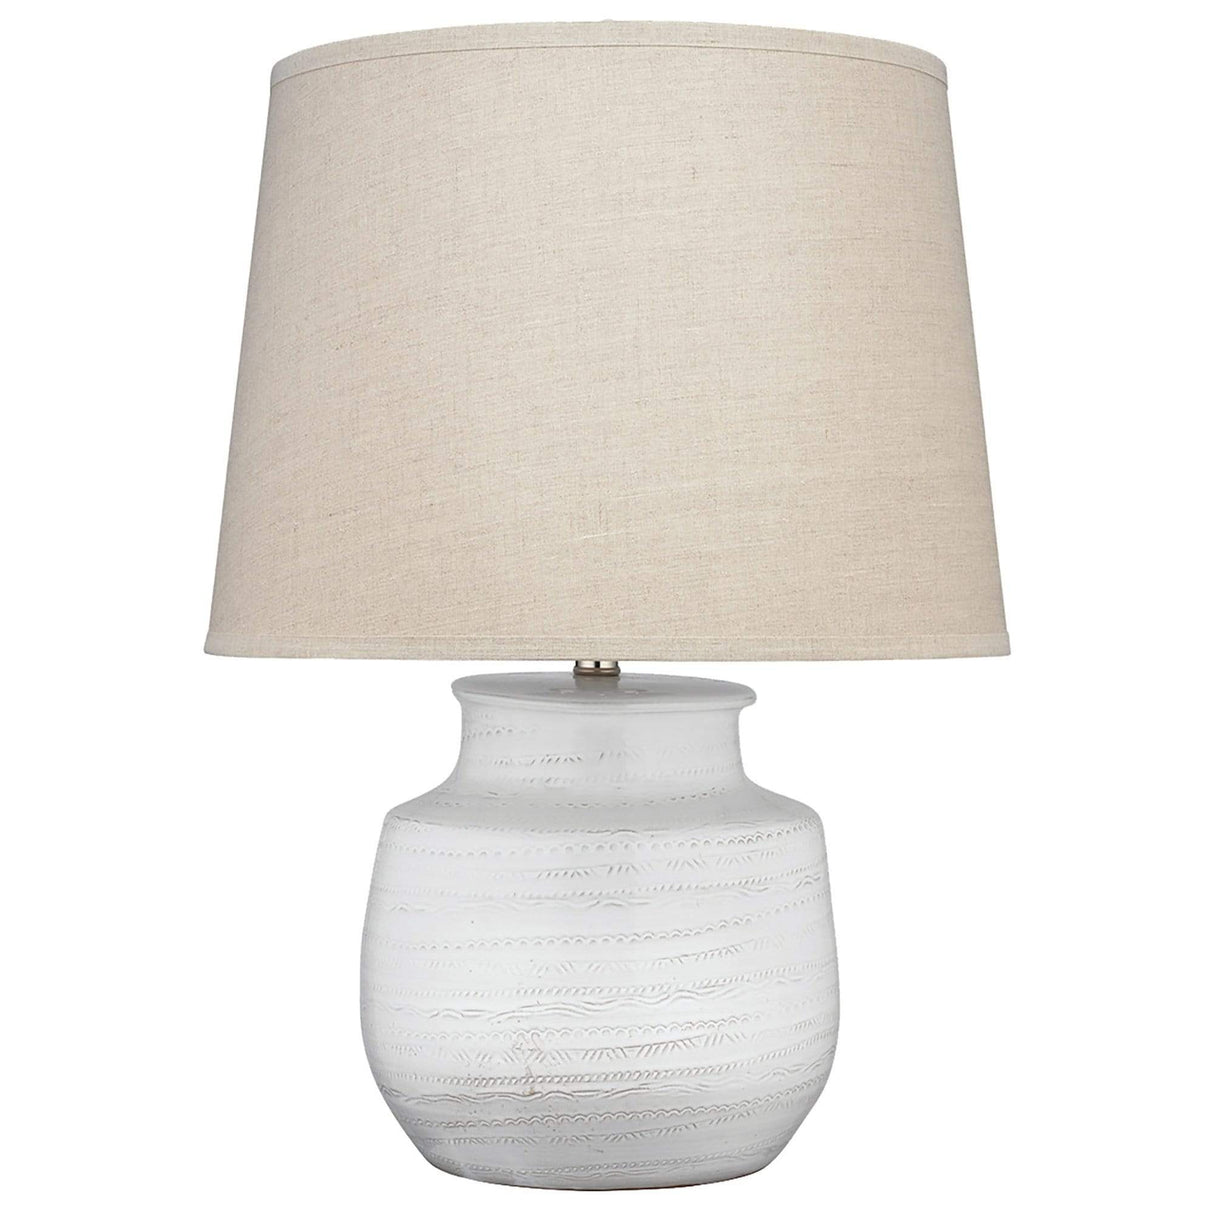 Jamie Young Small Trace Table Lamp Lighting jamie-young-9TRACESMTLWH 00688933027365